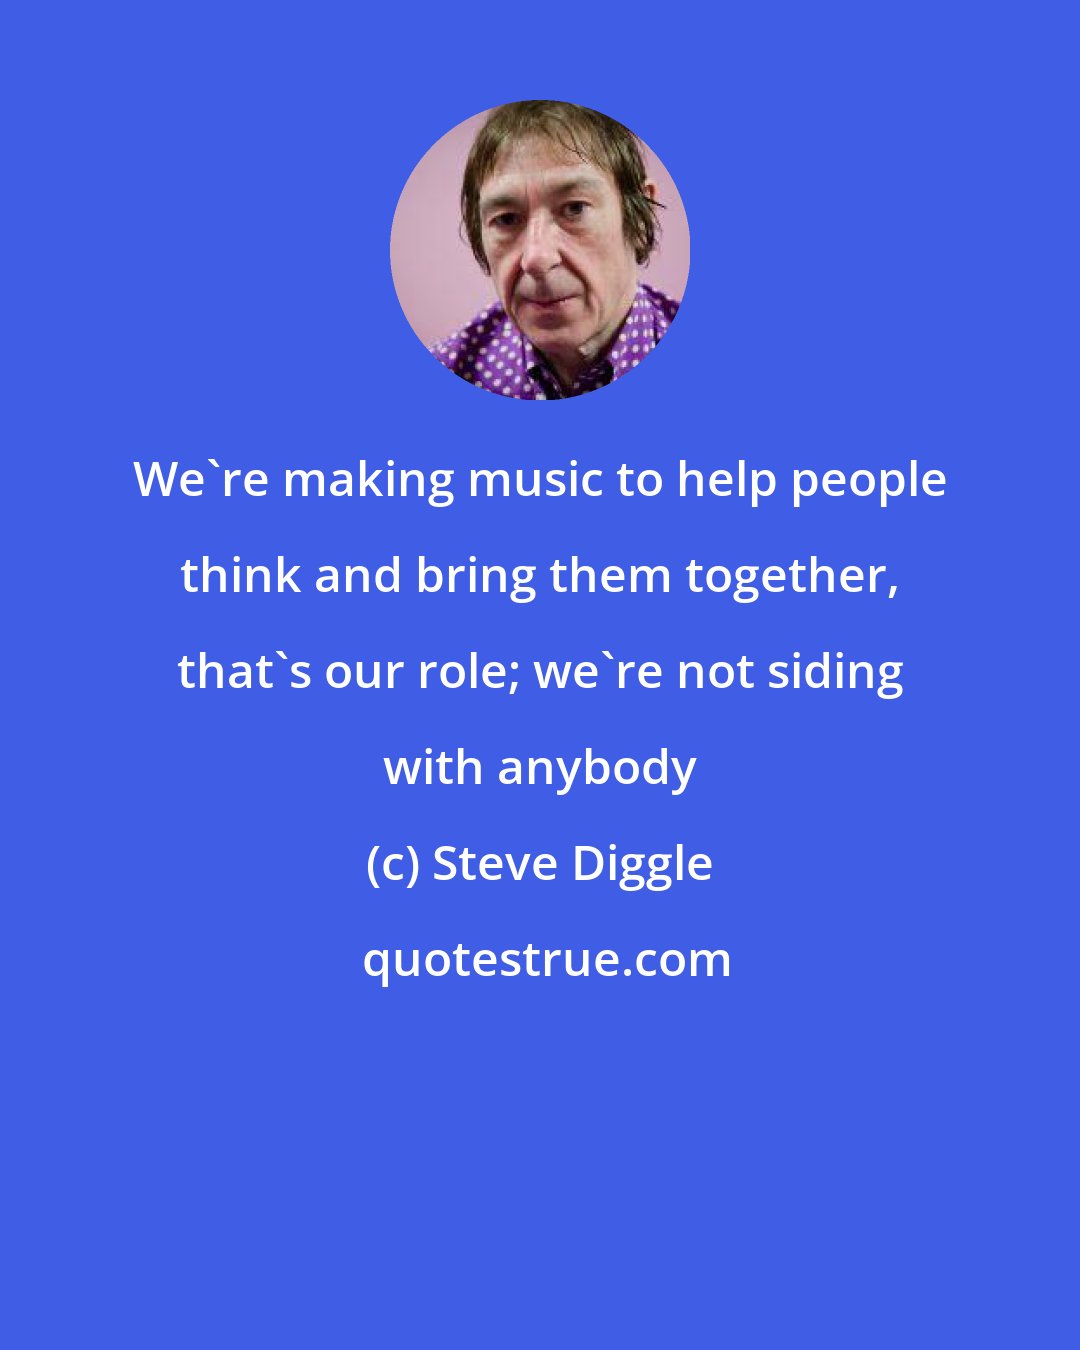 Steve Diggle: We're making music to help people think and bring them together, that's our role; we're not siding with anybody